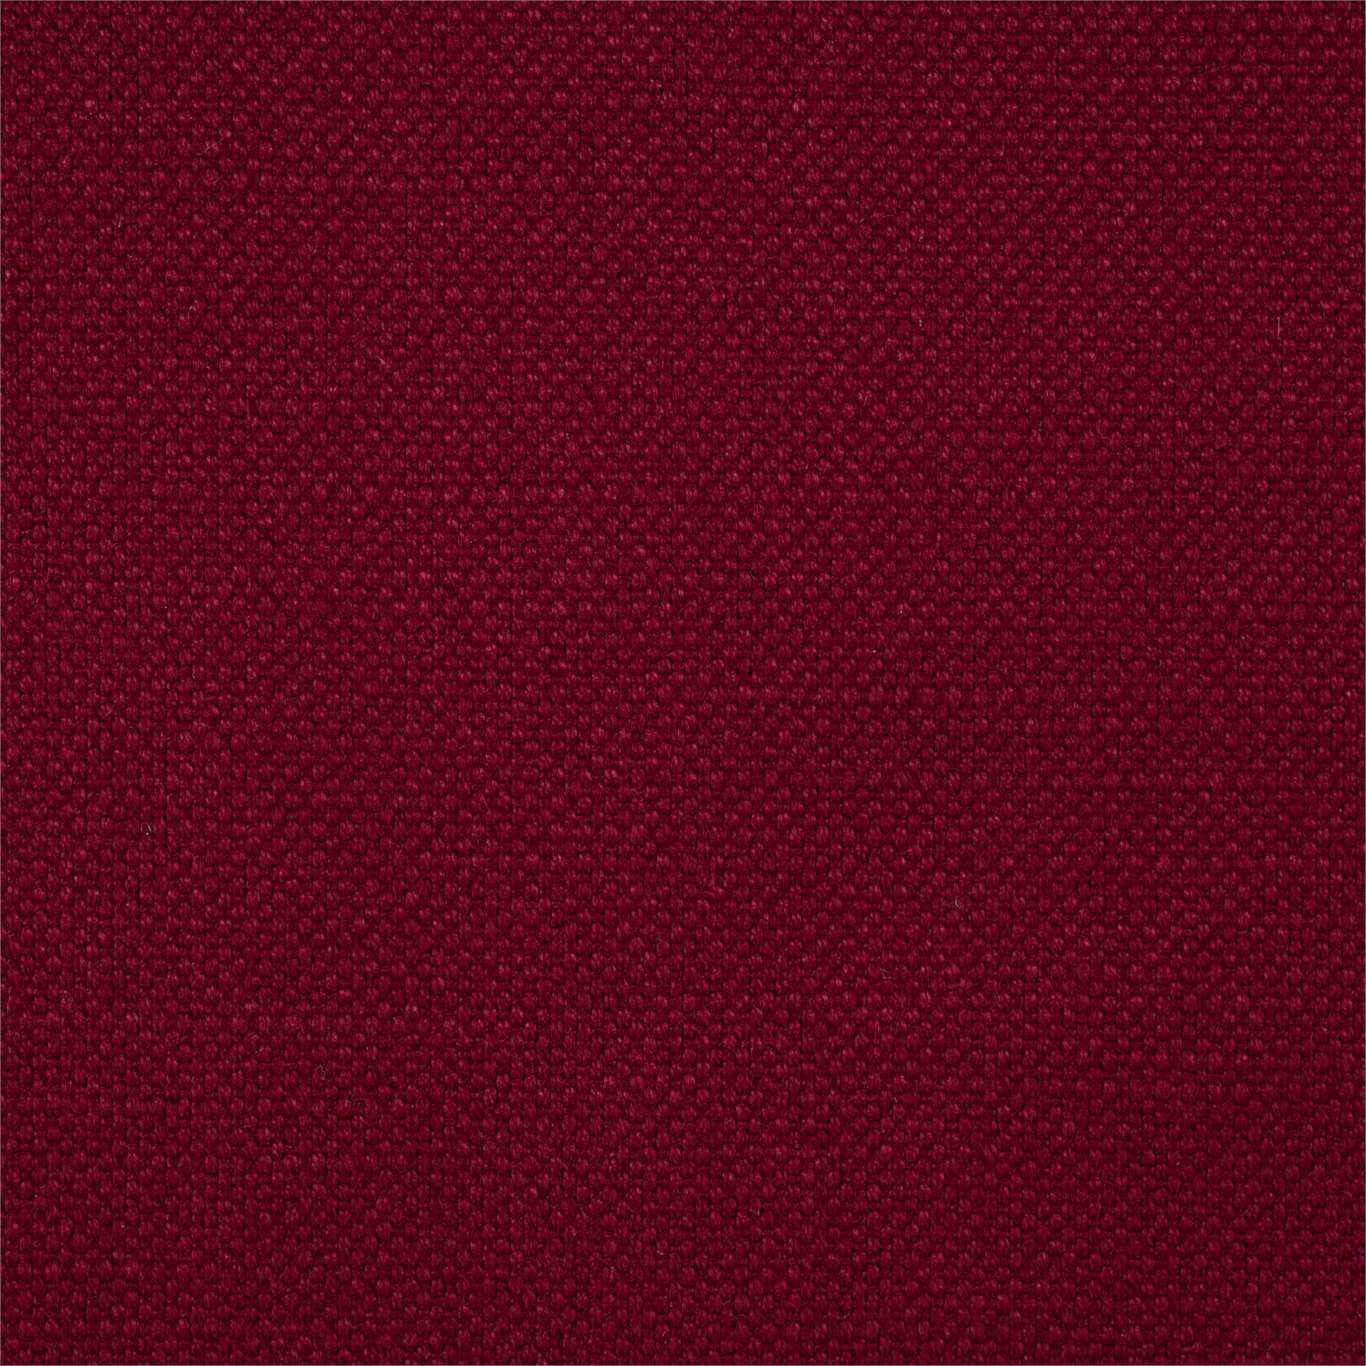 Arley Fabric by Sanderson - DALY245817 - Bordeaux